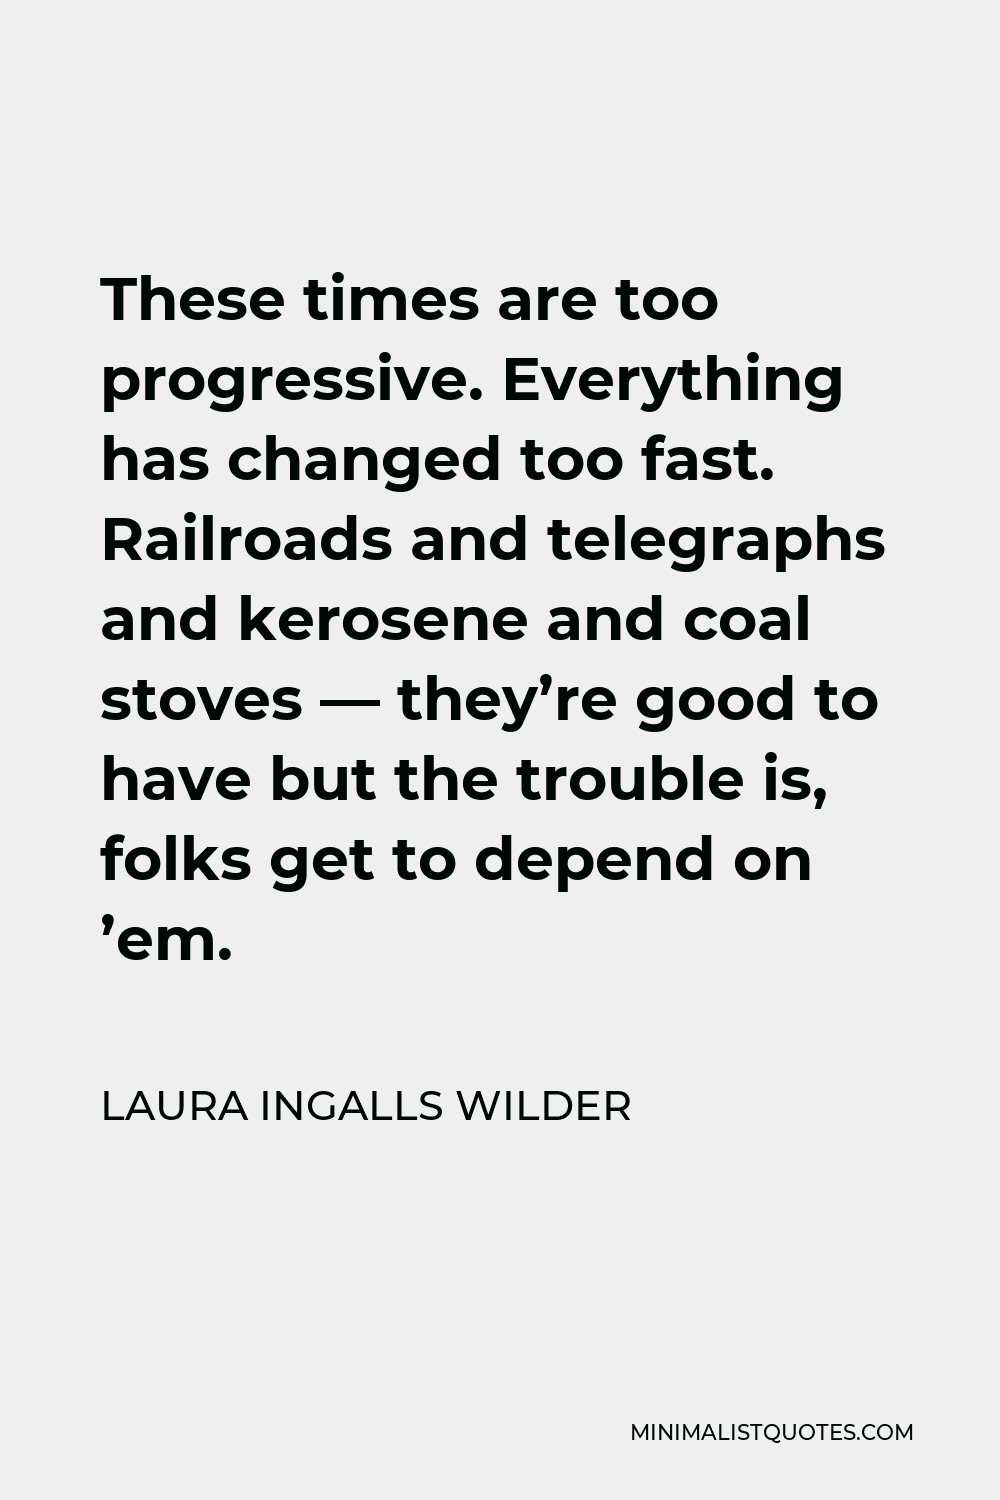 Laura Ingalls Wilder Quote - These times are too progressive. Everything has changed too fast. Railroads and telegraphs and kerosene and coal stoves — they’re good to have but the trouble is, folks get to depend on ’em.